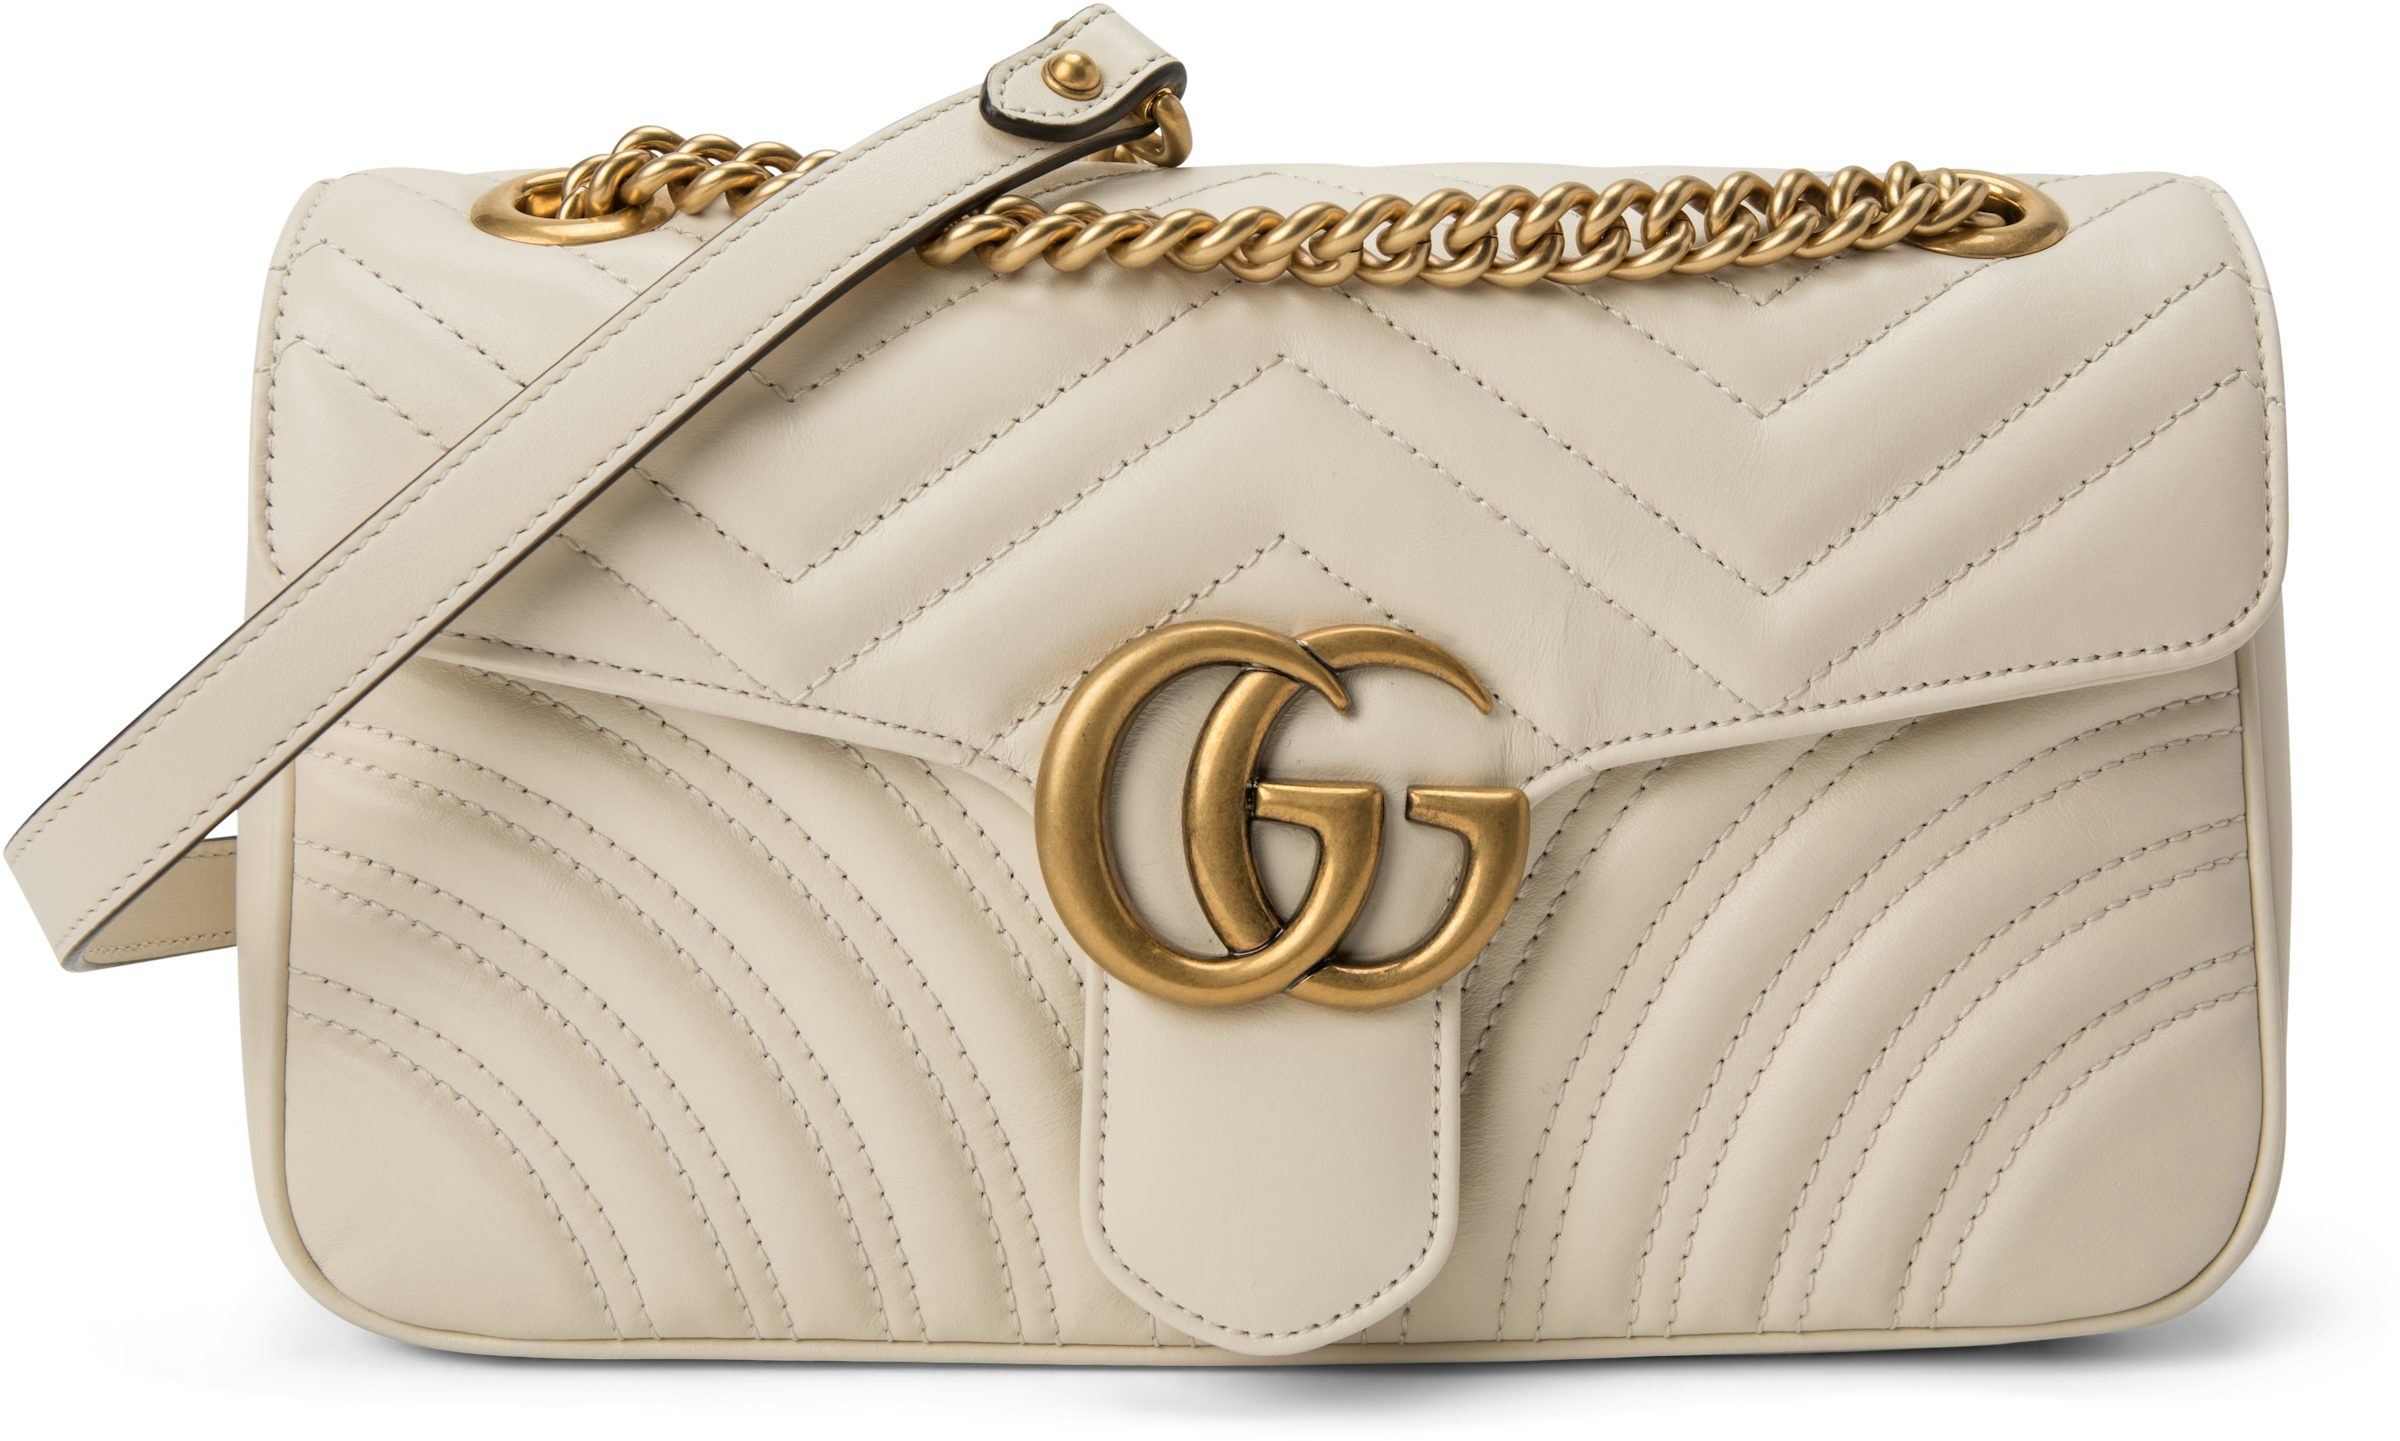 White Leather GG Marmont Small Shoulder Bag